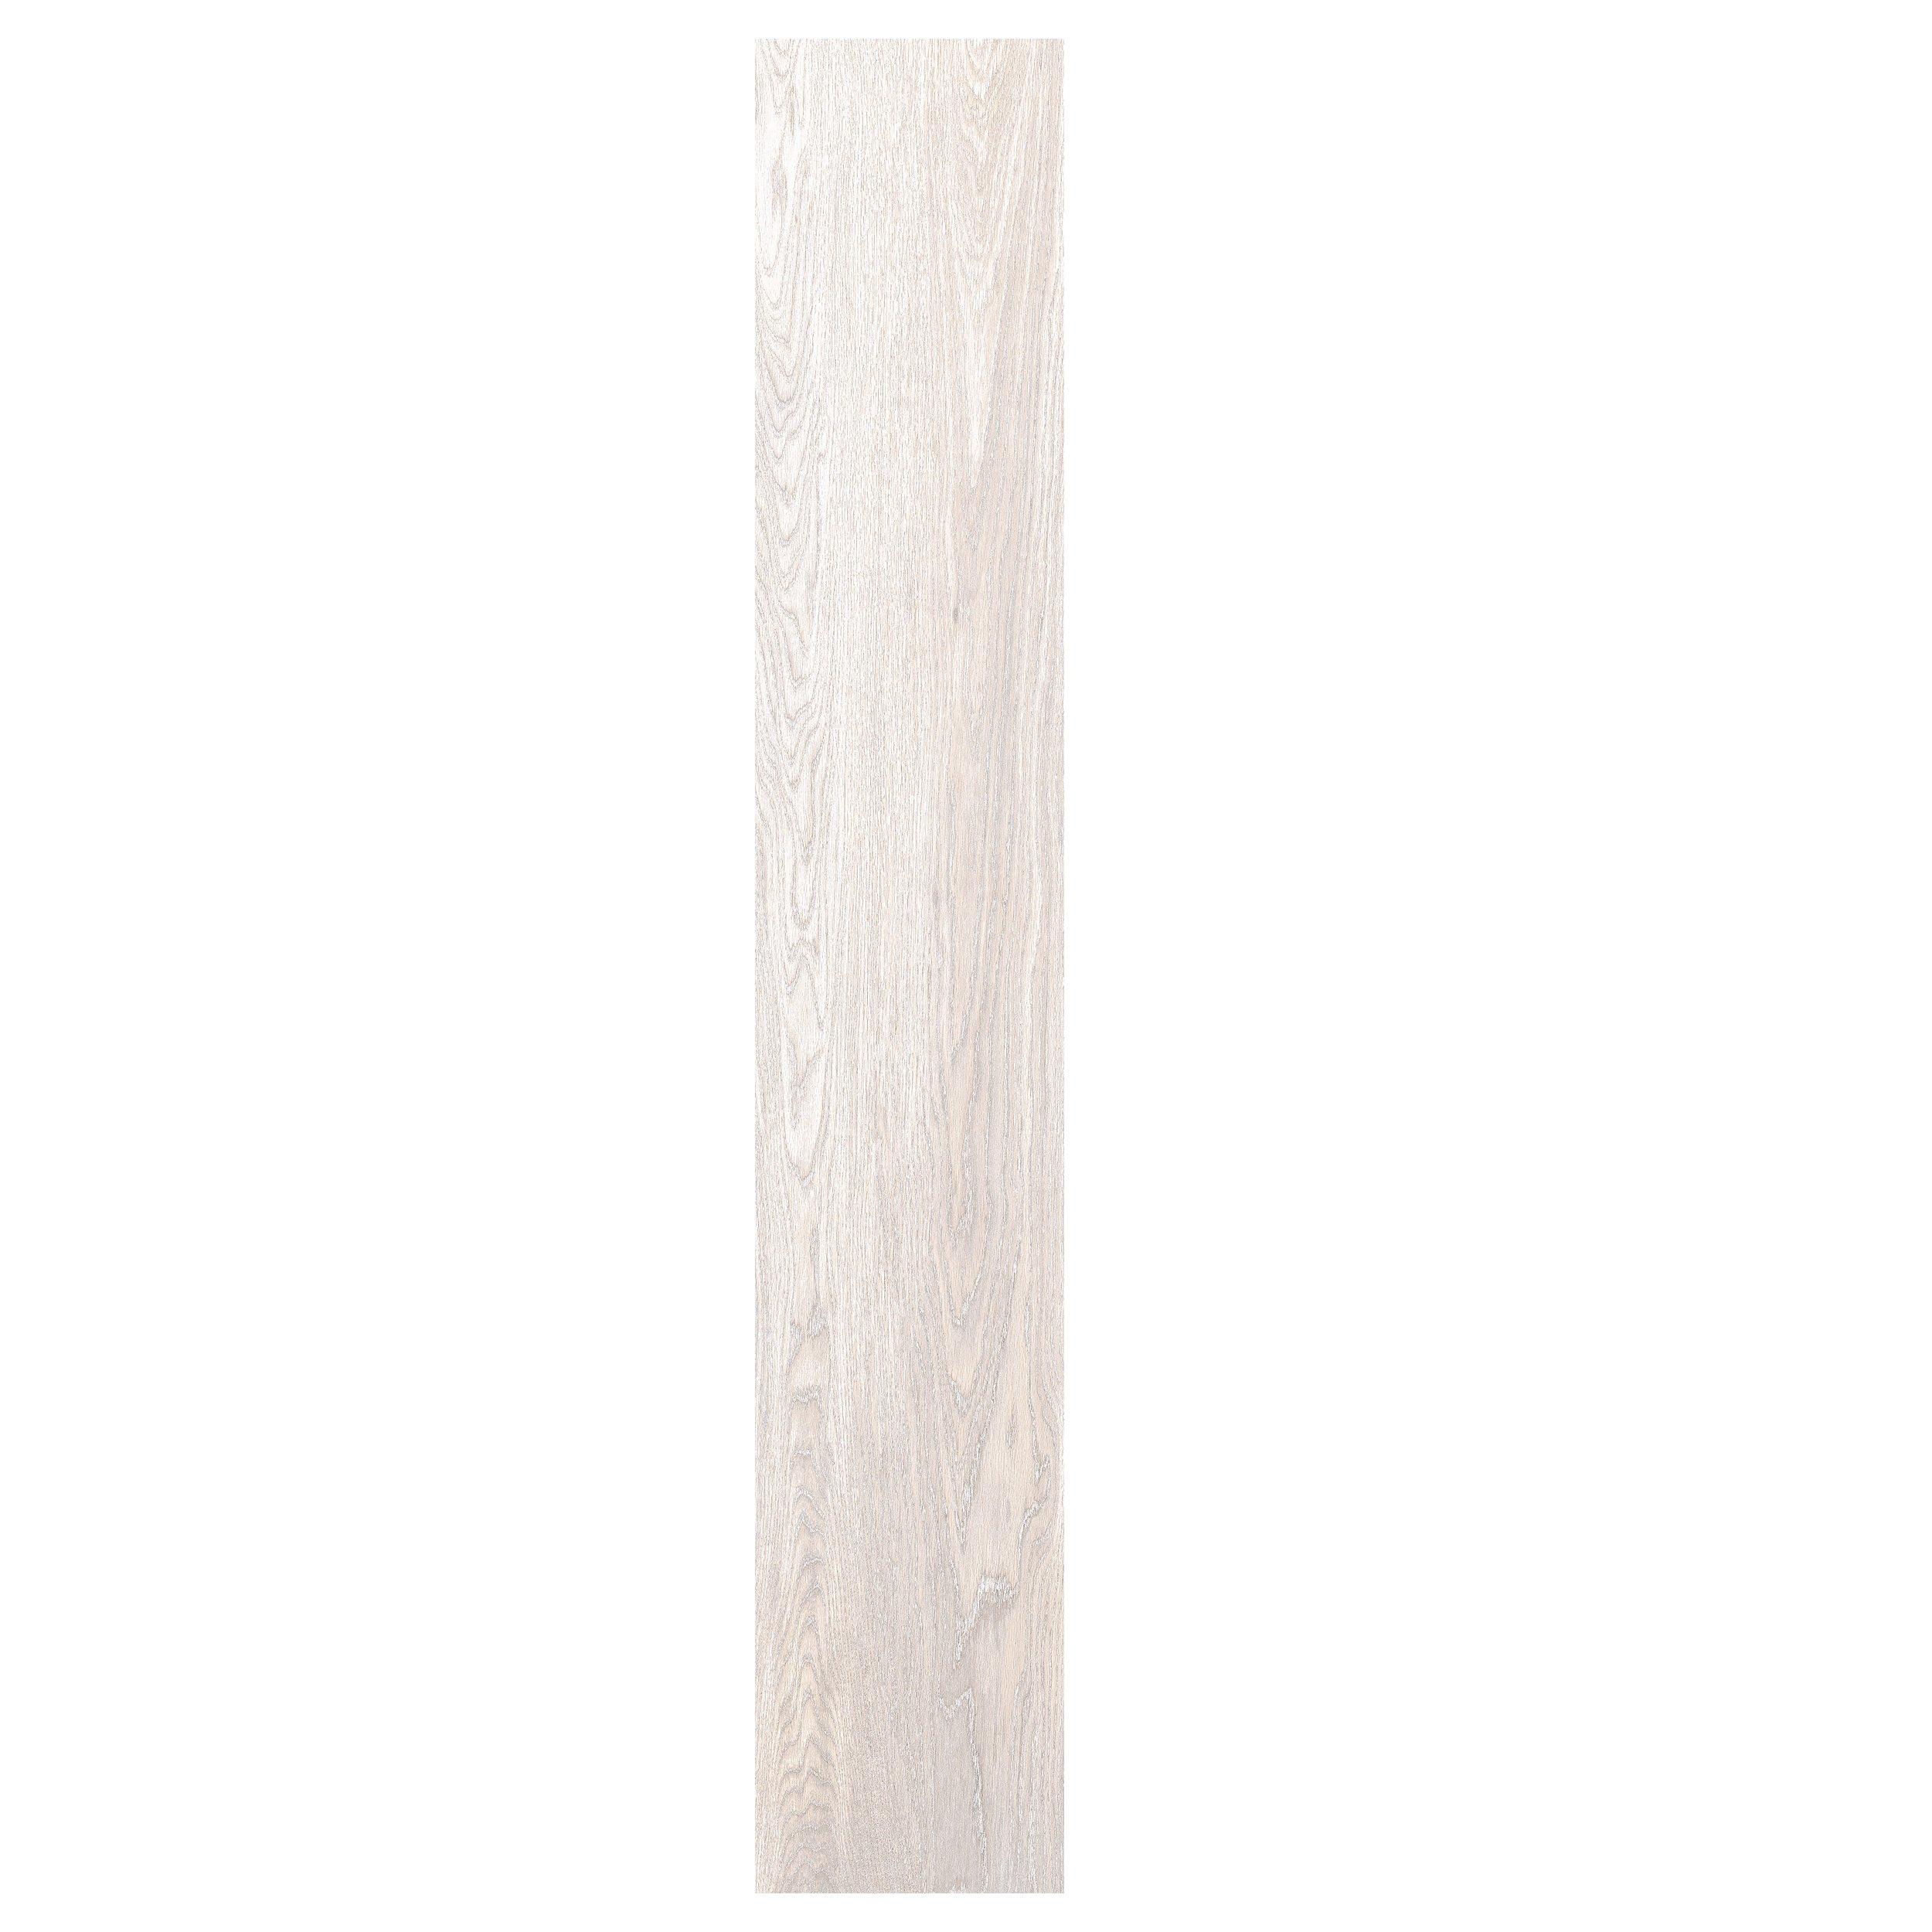 Ithica White Wood Plank Porcelain Tile